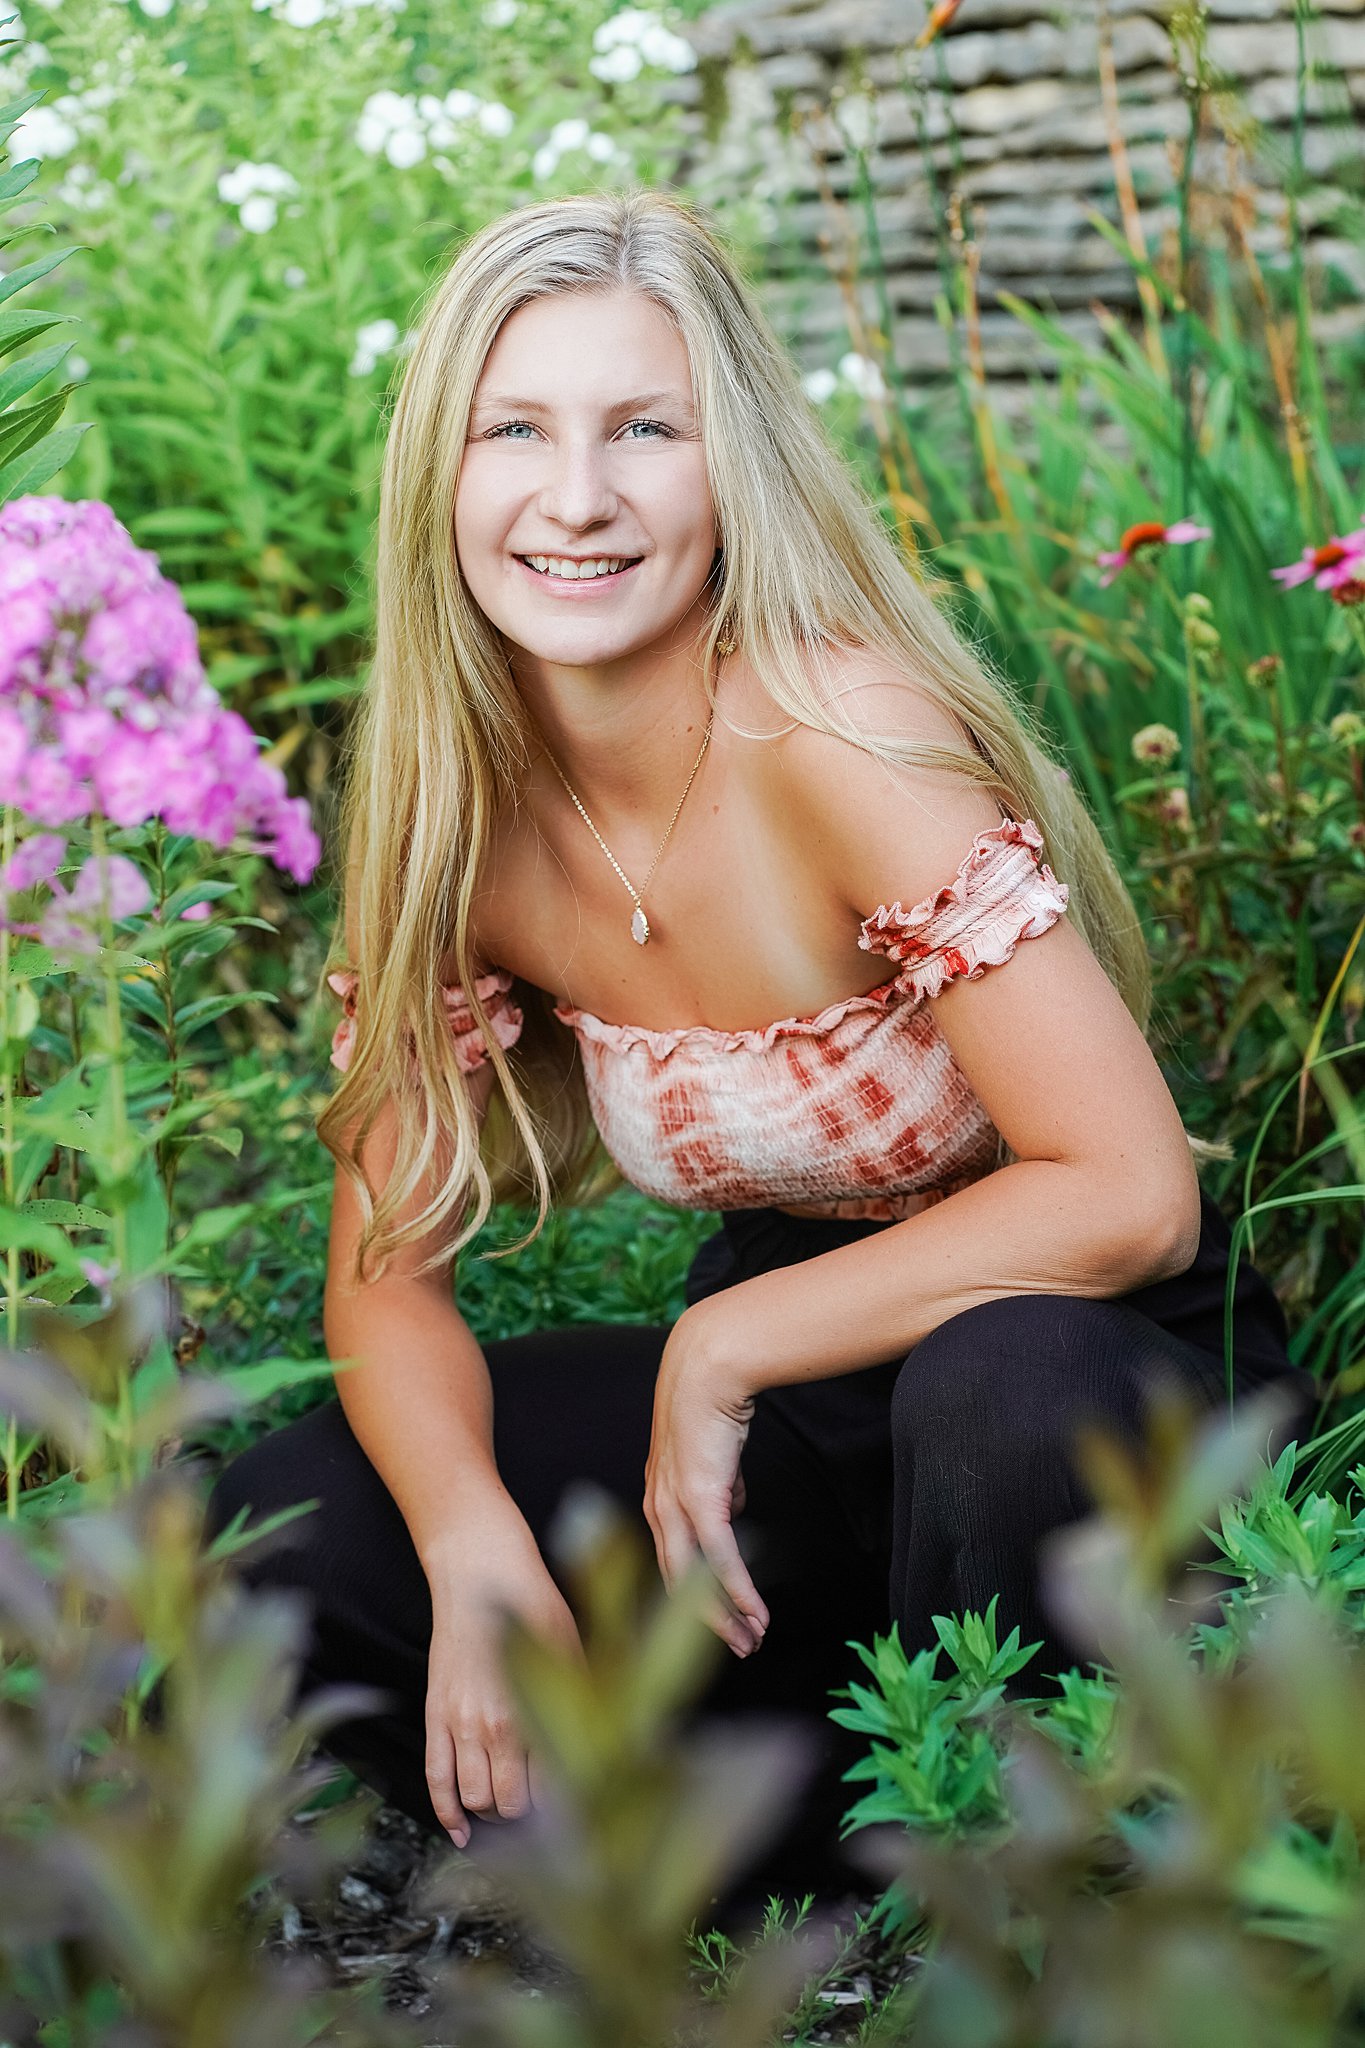 High school senior crouches in a colorful flower garden mabel canton high school